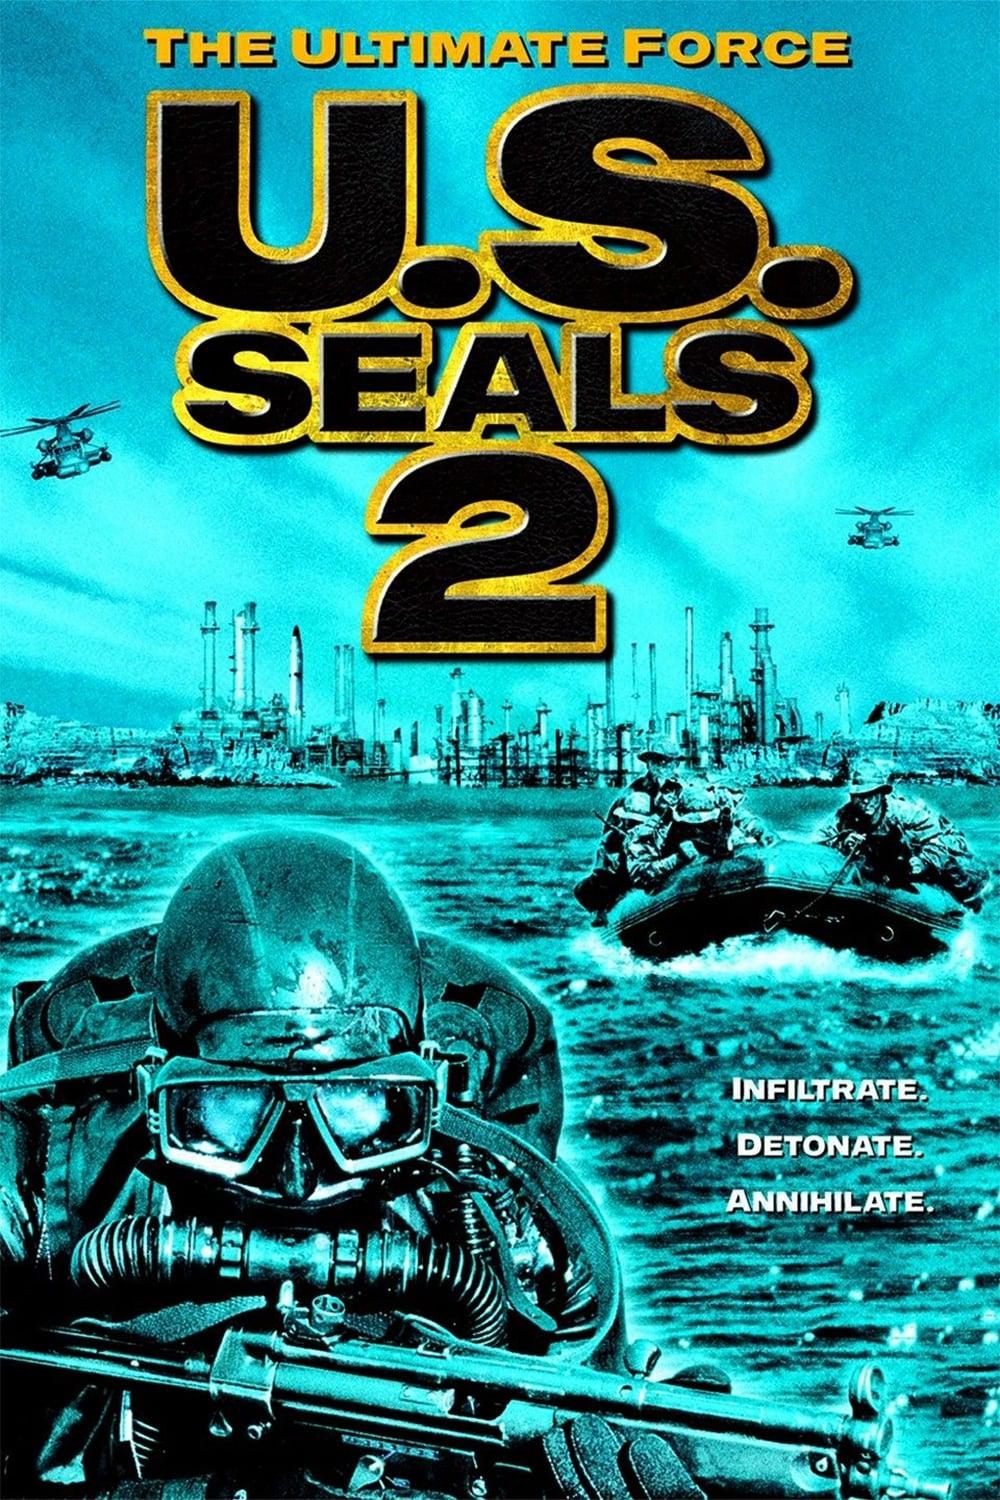 U.S. Seals II: The Ultimate Force poster